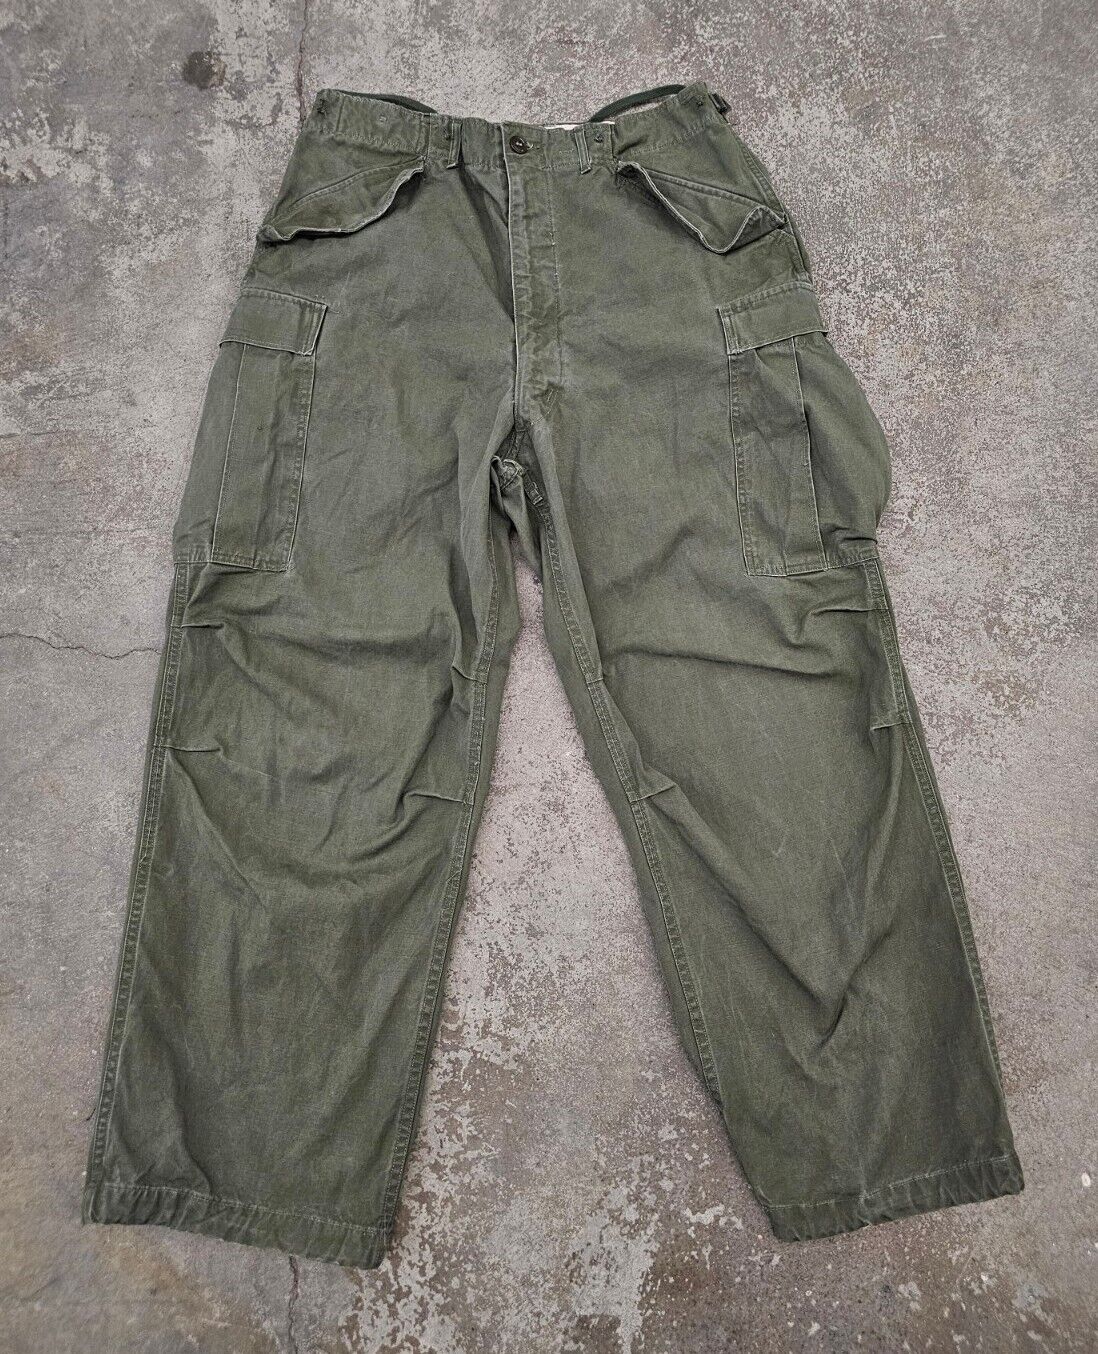 Vintage 50's M-1951 Field Trousers Cargo Army Military Pants Size Regular Medium